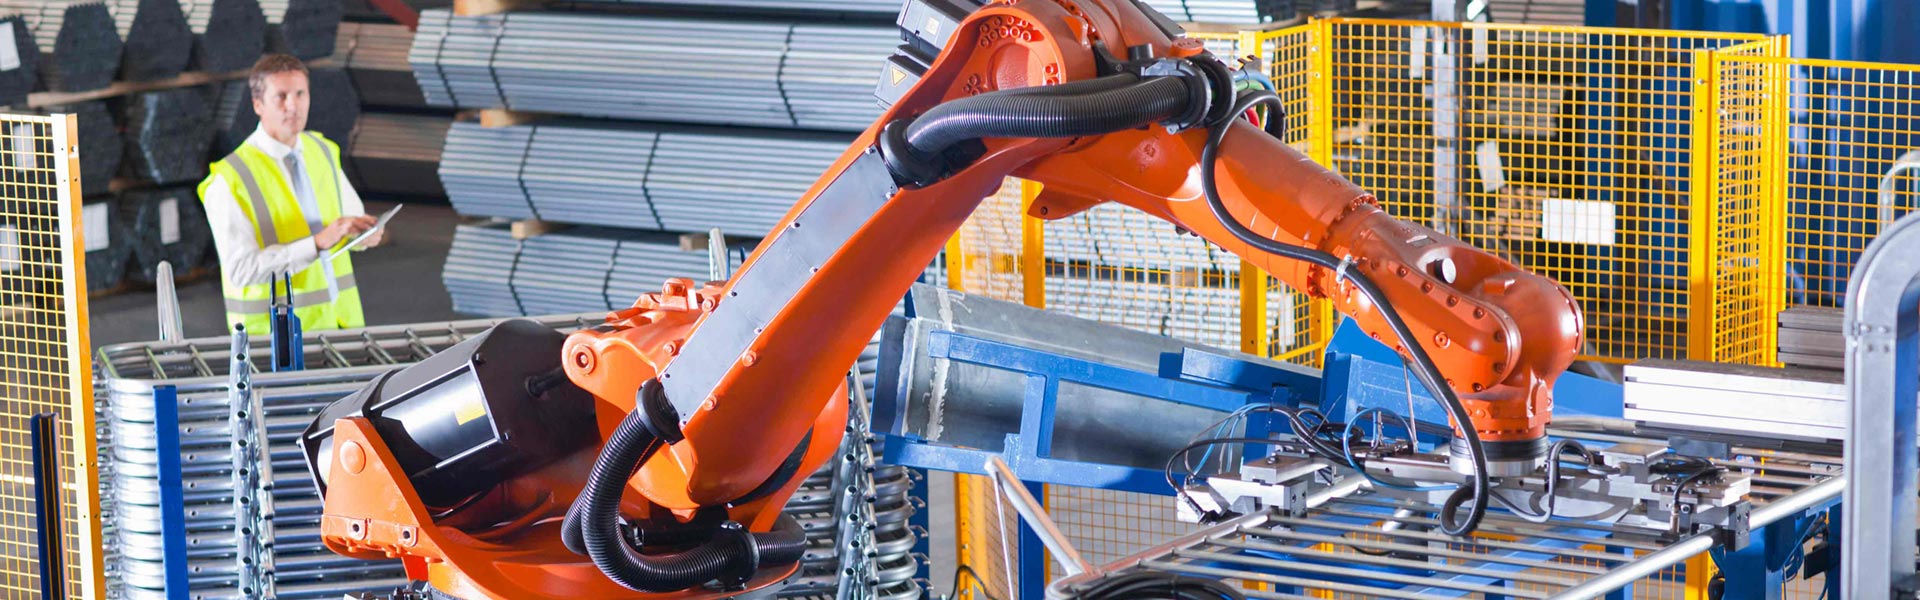 Industry 4.Now: Agile Production in Uncertain Times